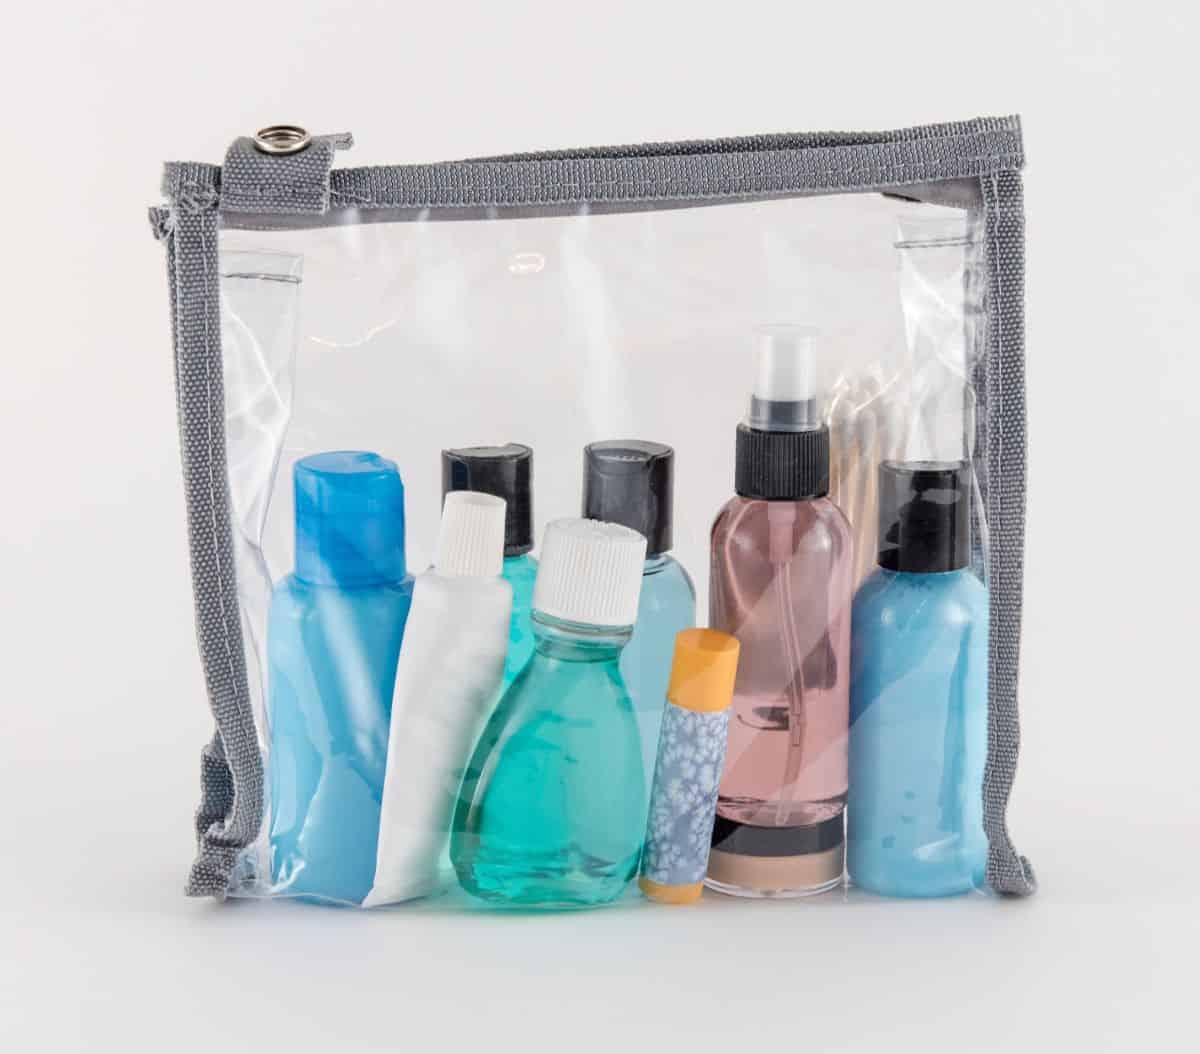 How to Pack Toiletries in a Carry-on Bag